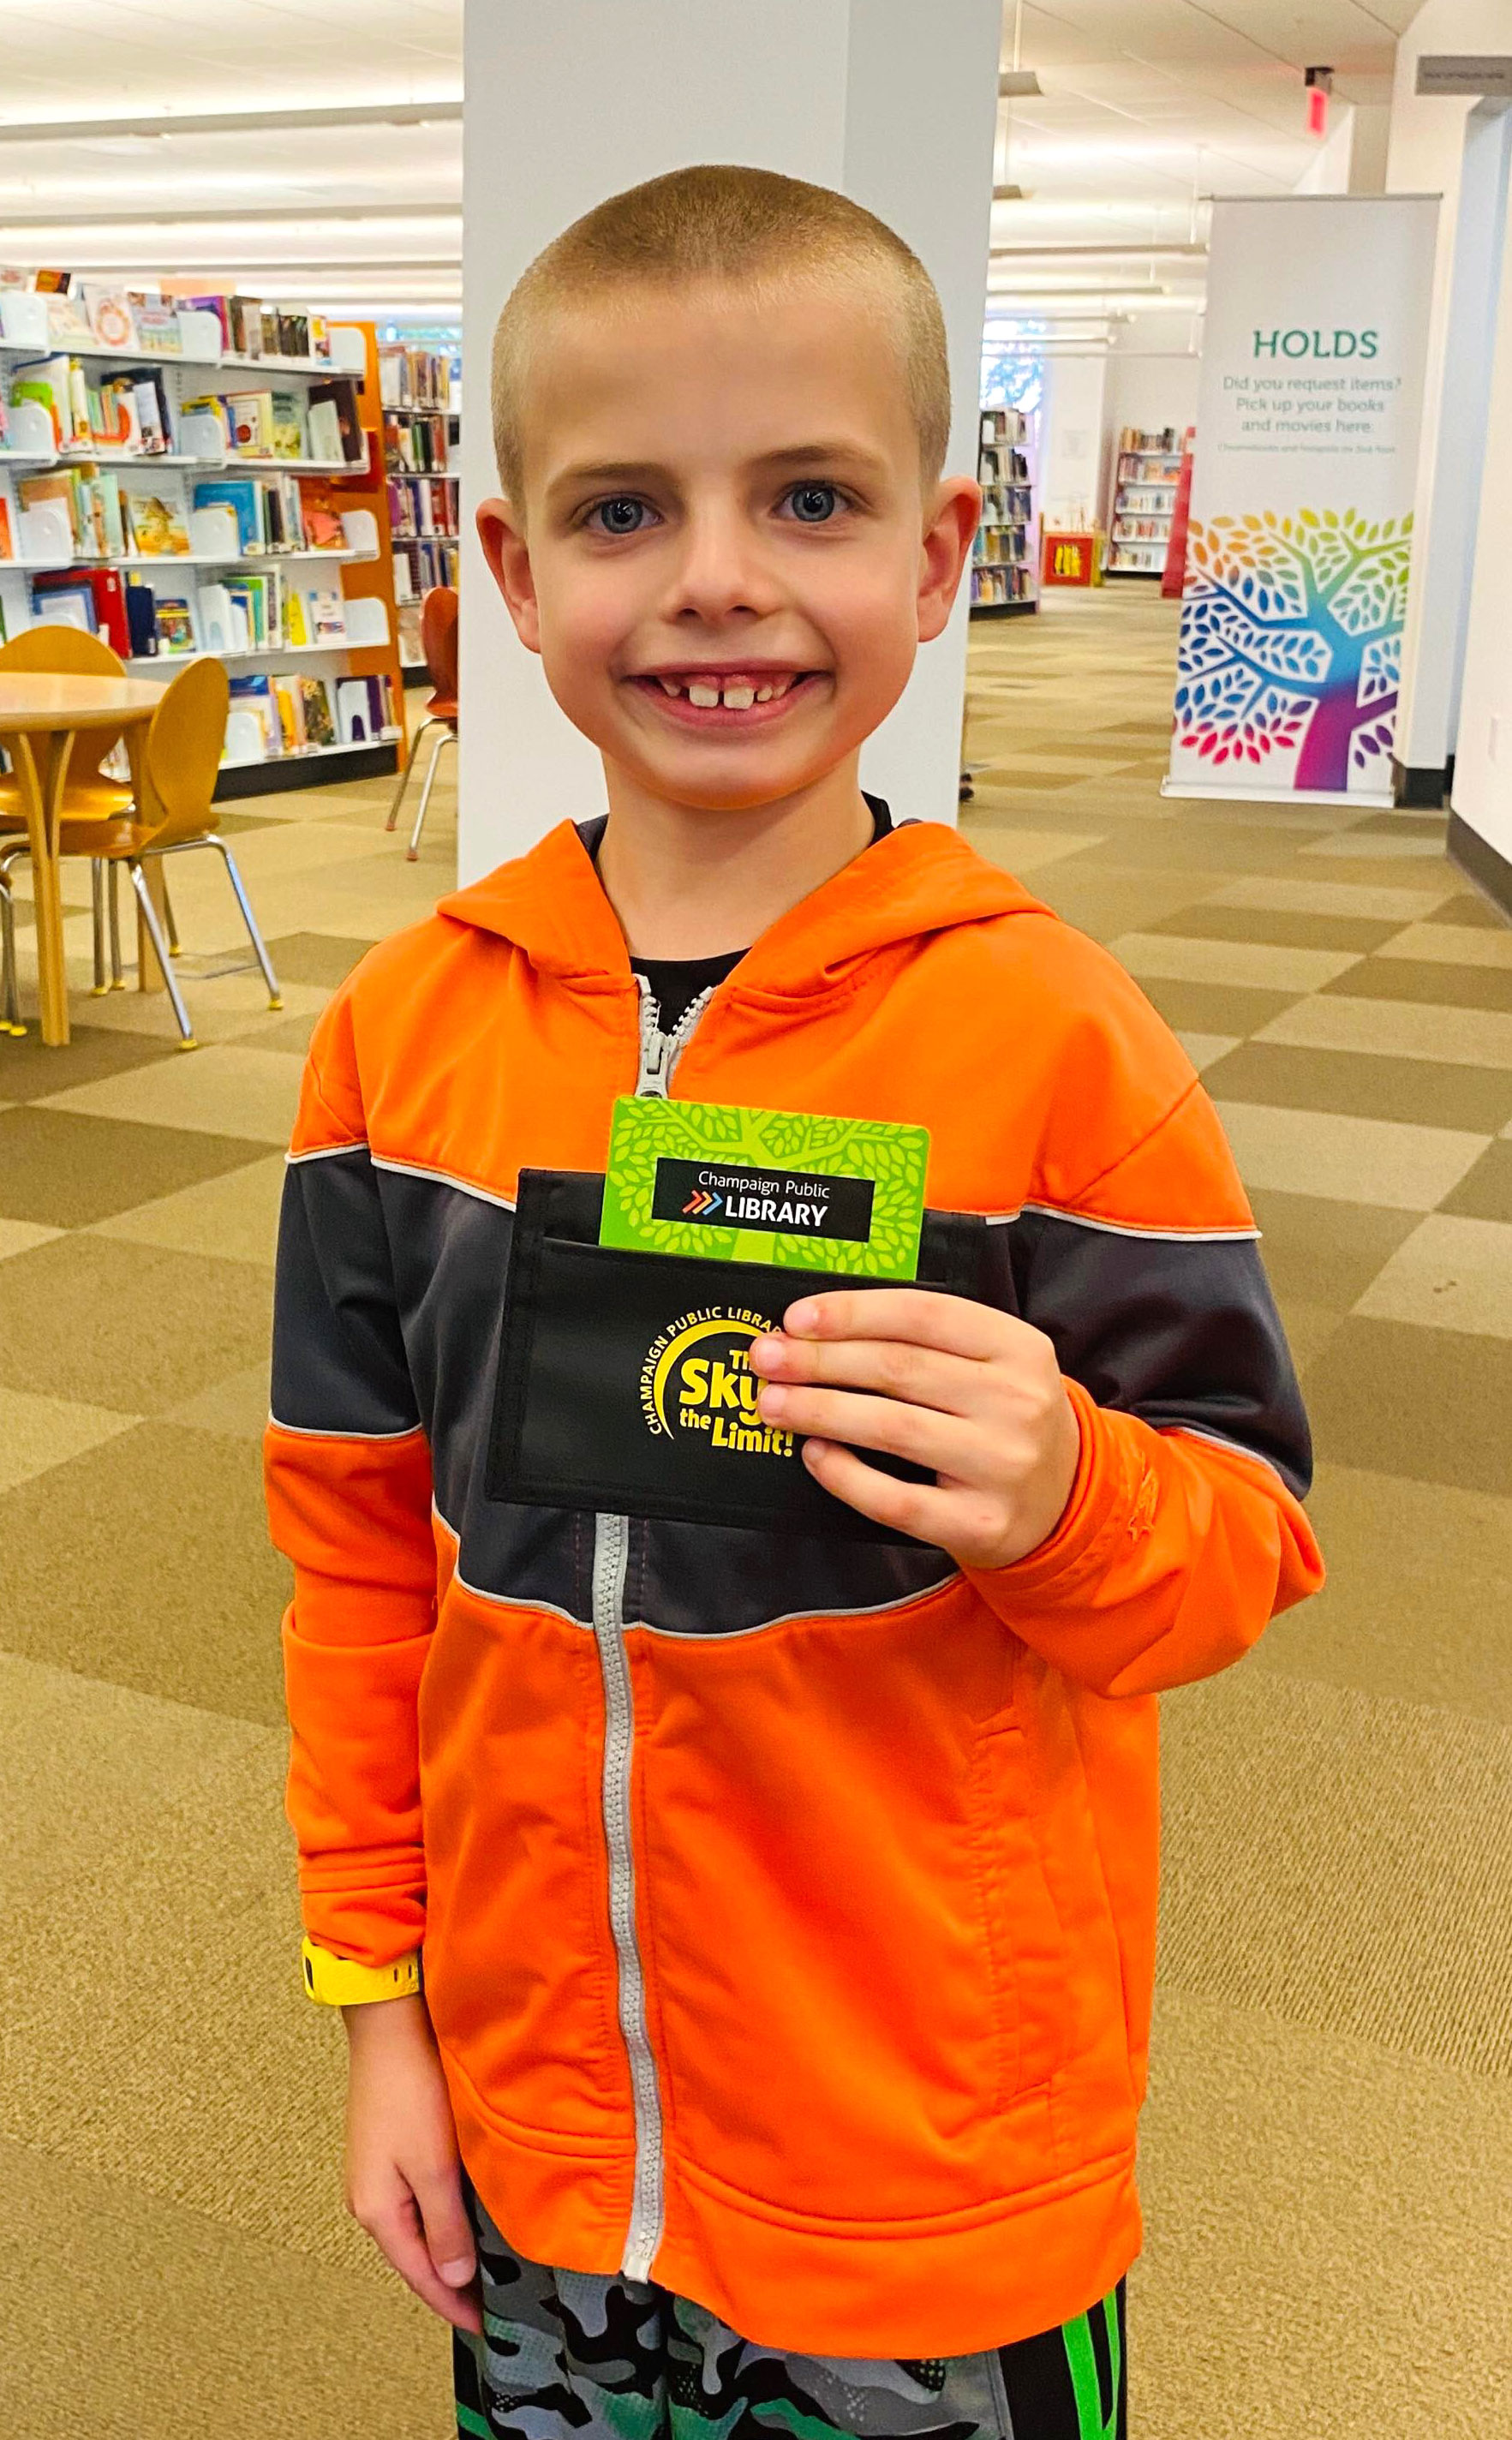 4 photos of boy getting first library card and posing by library sign outside